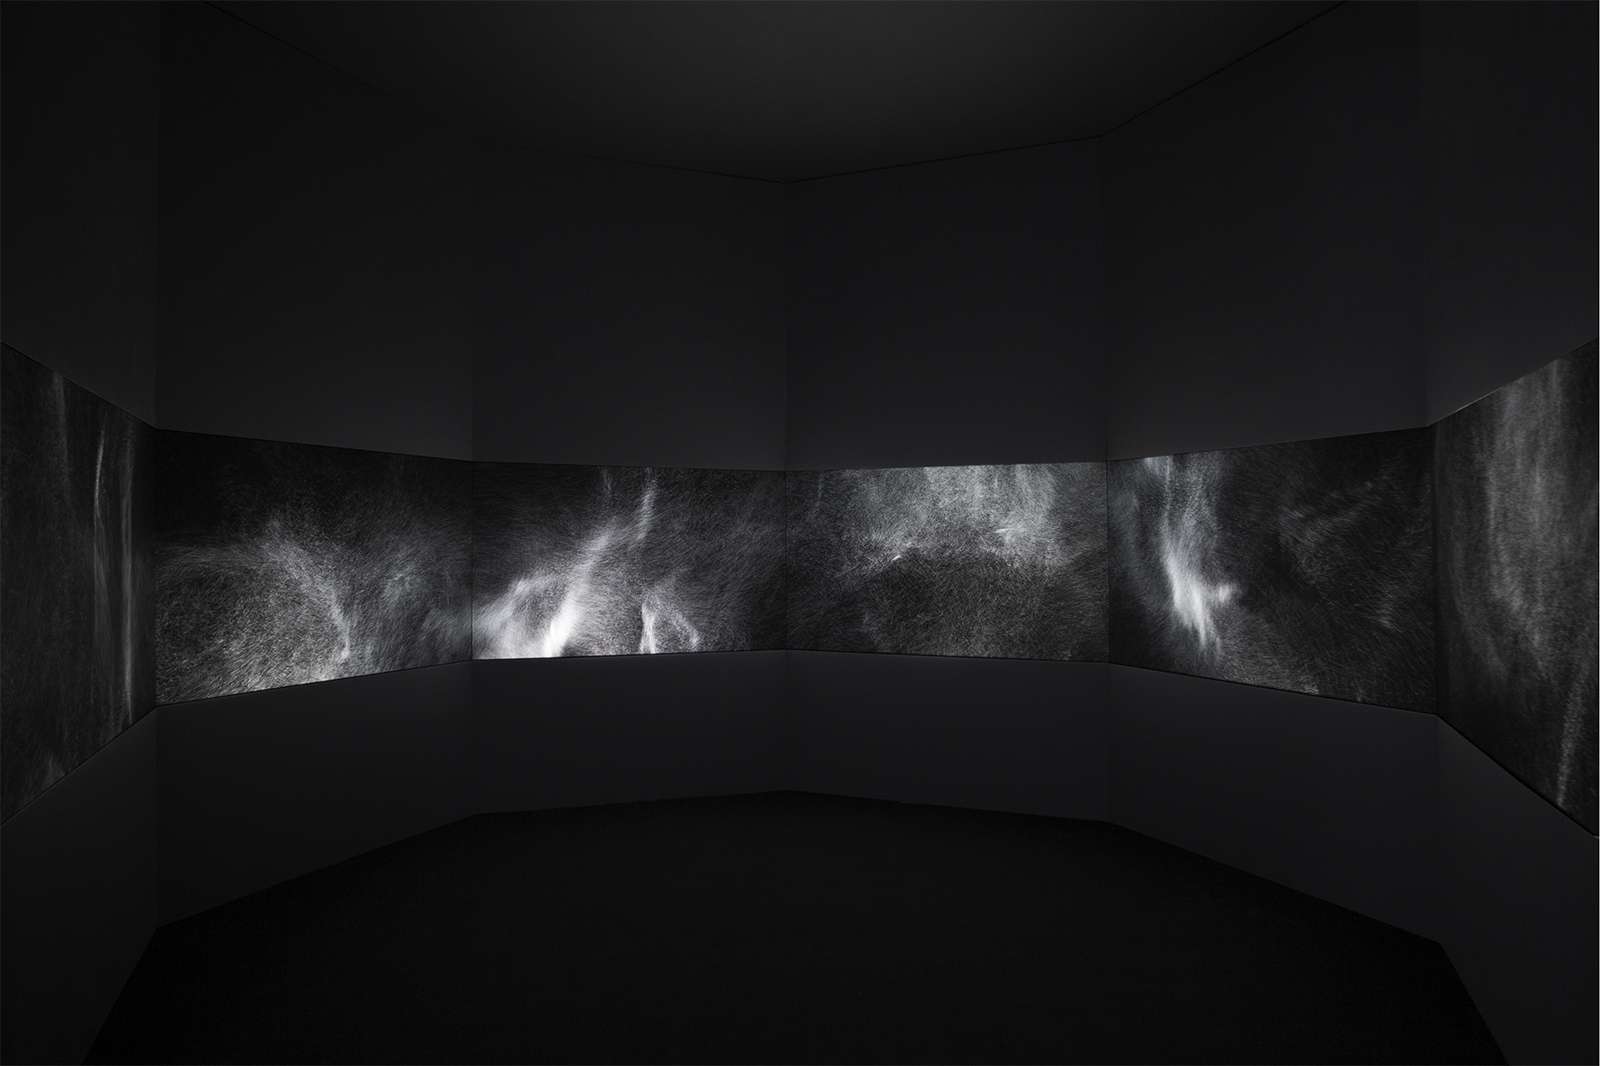 Leo Villareal, Particle Chamber, 2017. Six channel digital projection, electrical hardware, and custom software. 13ft x 17ft 1/2in x 15ft. © Leo Villareal. Courtesy Pace Gallery. Photo: Marl Waldhauser